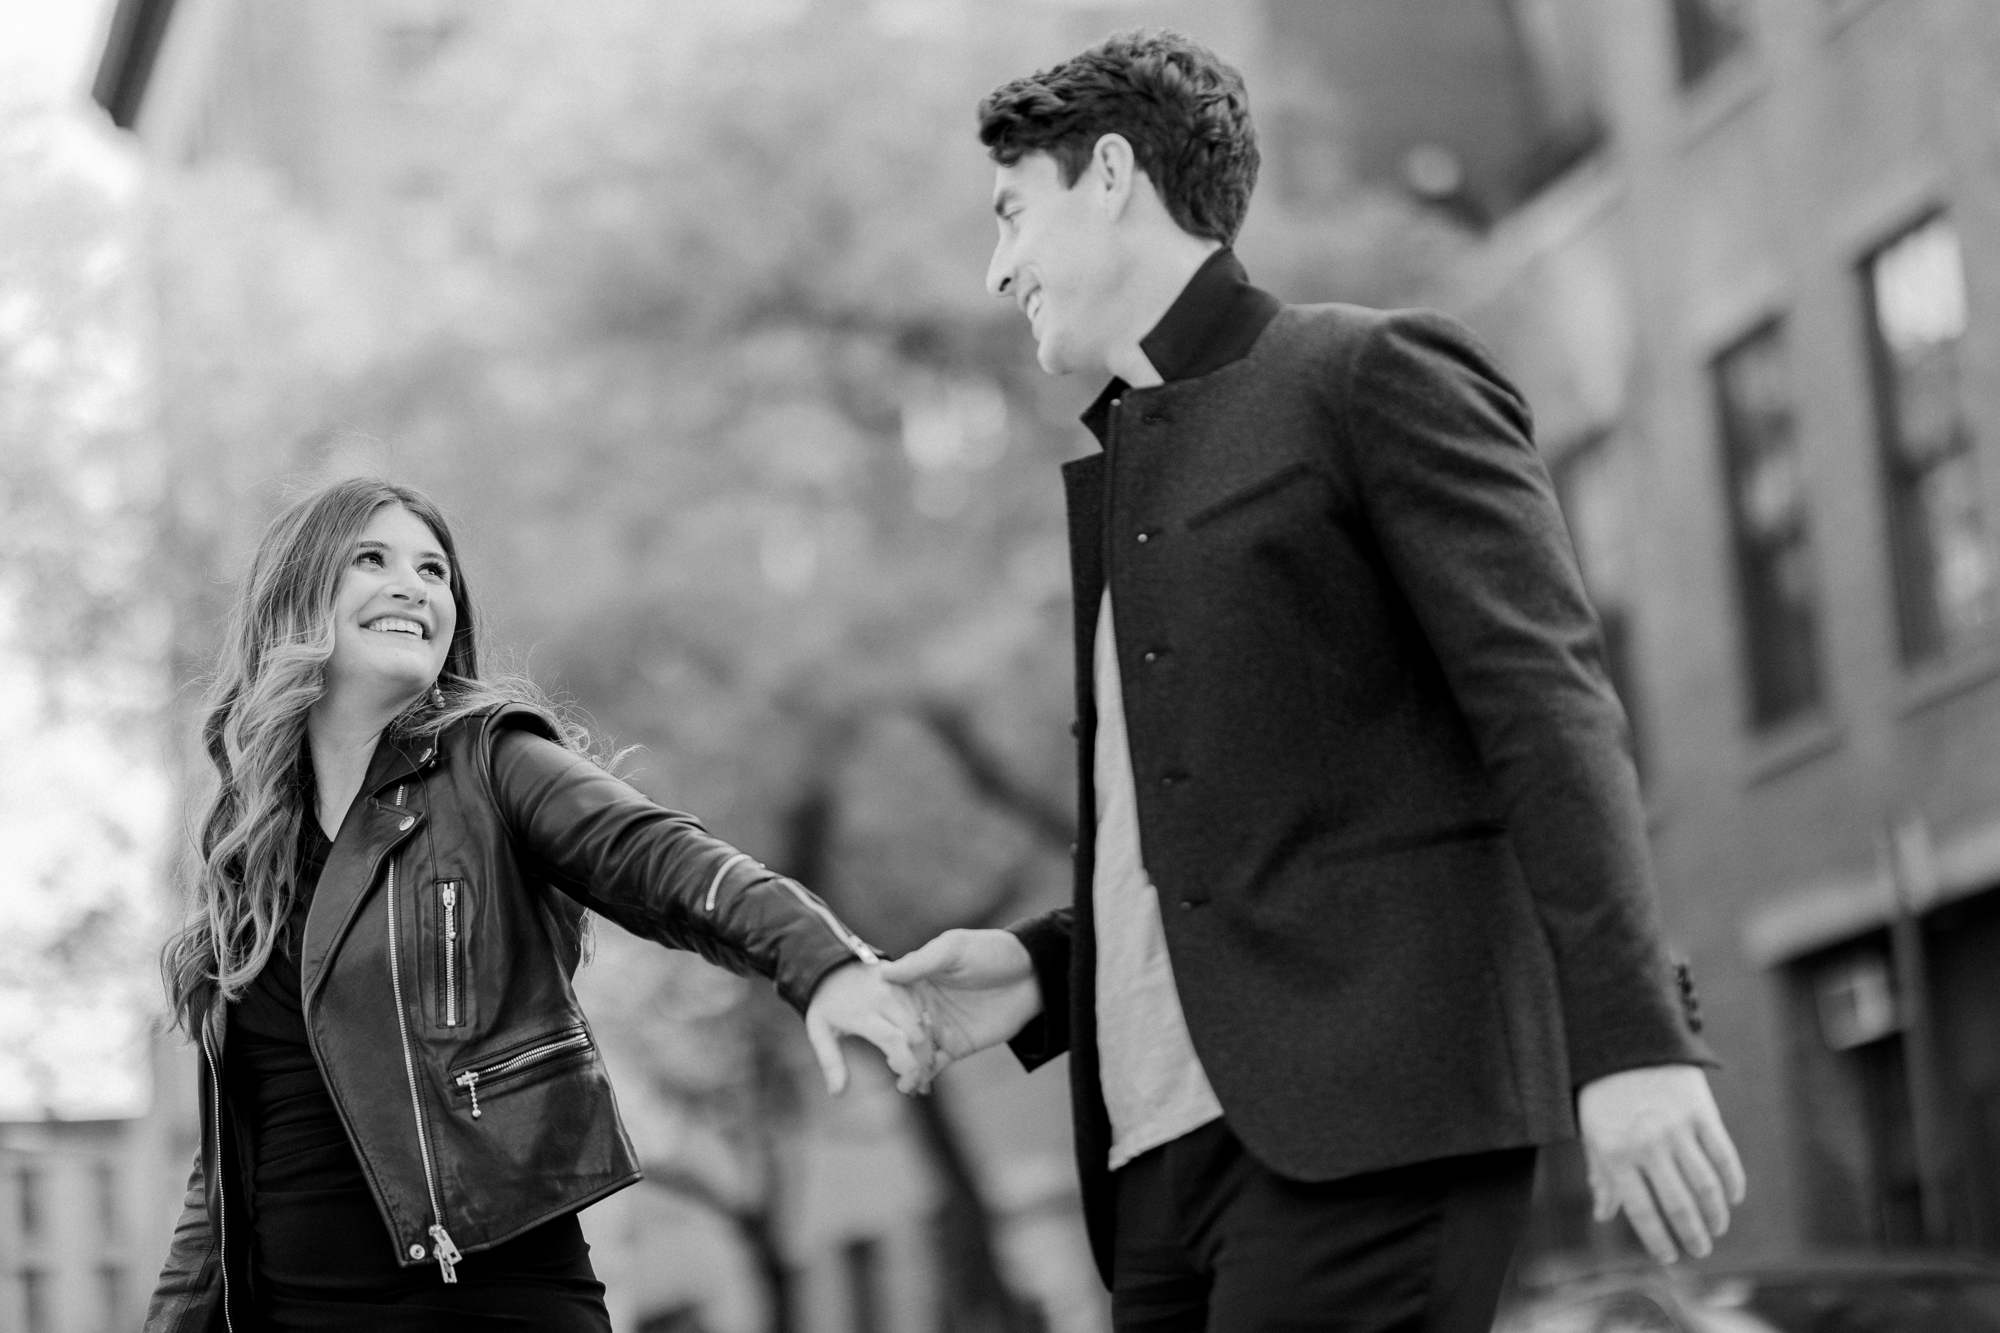 Artistic West Village Engagement Photos with Spring Blossoms